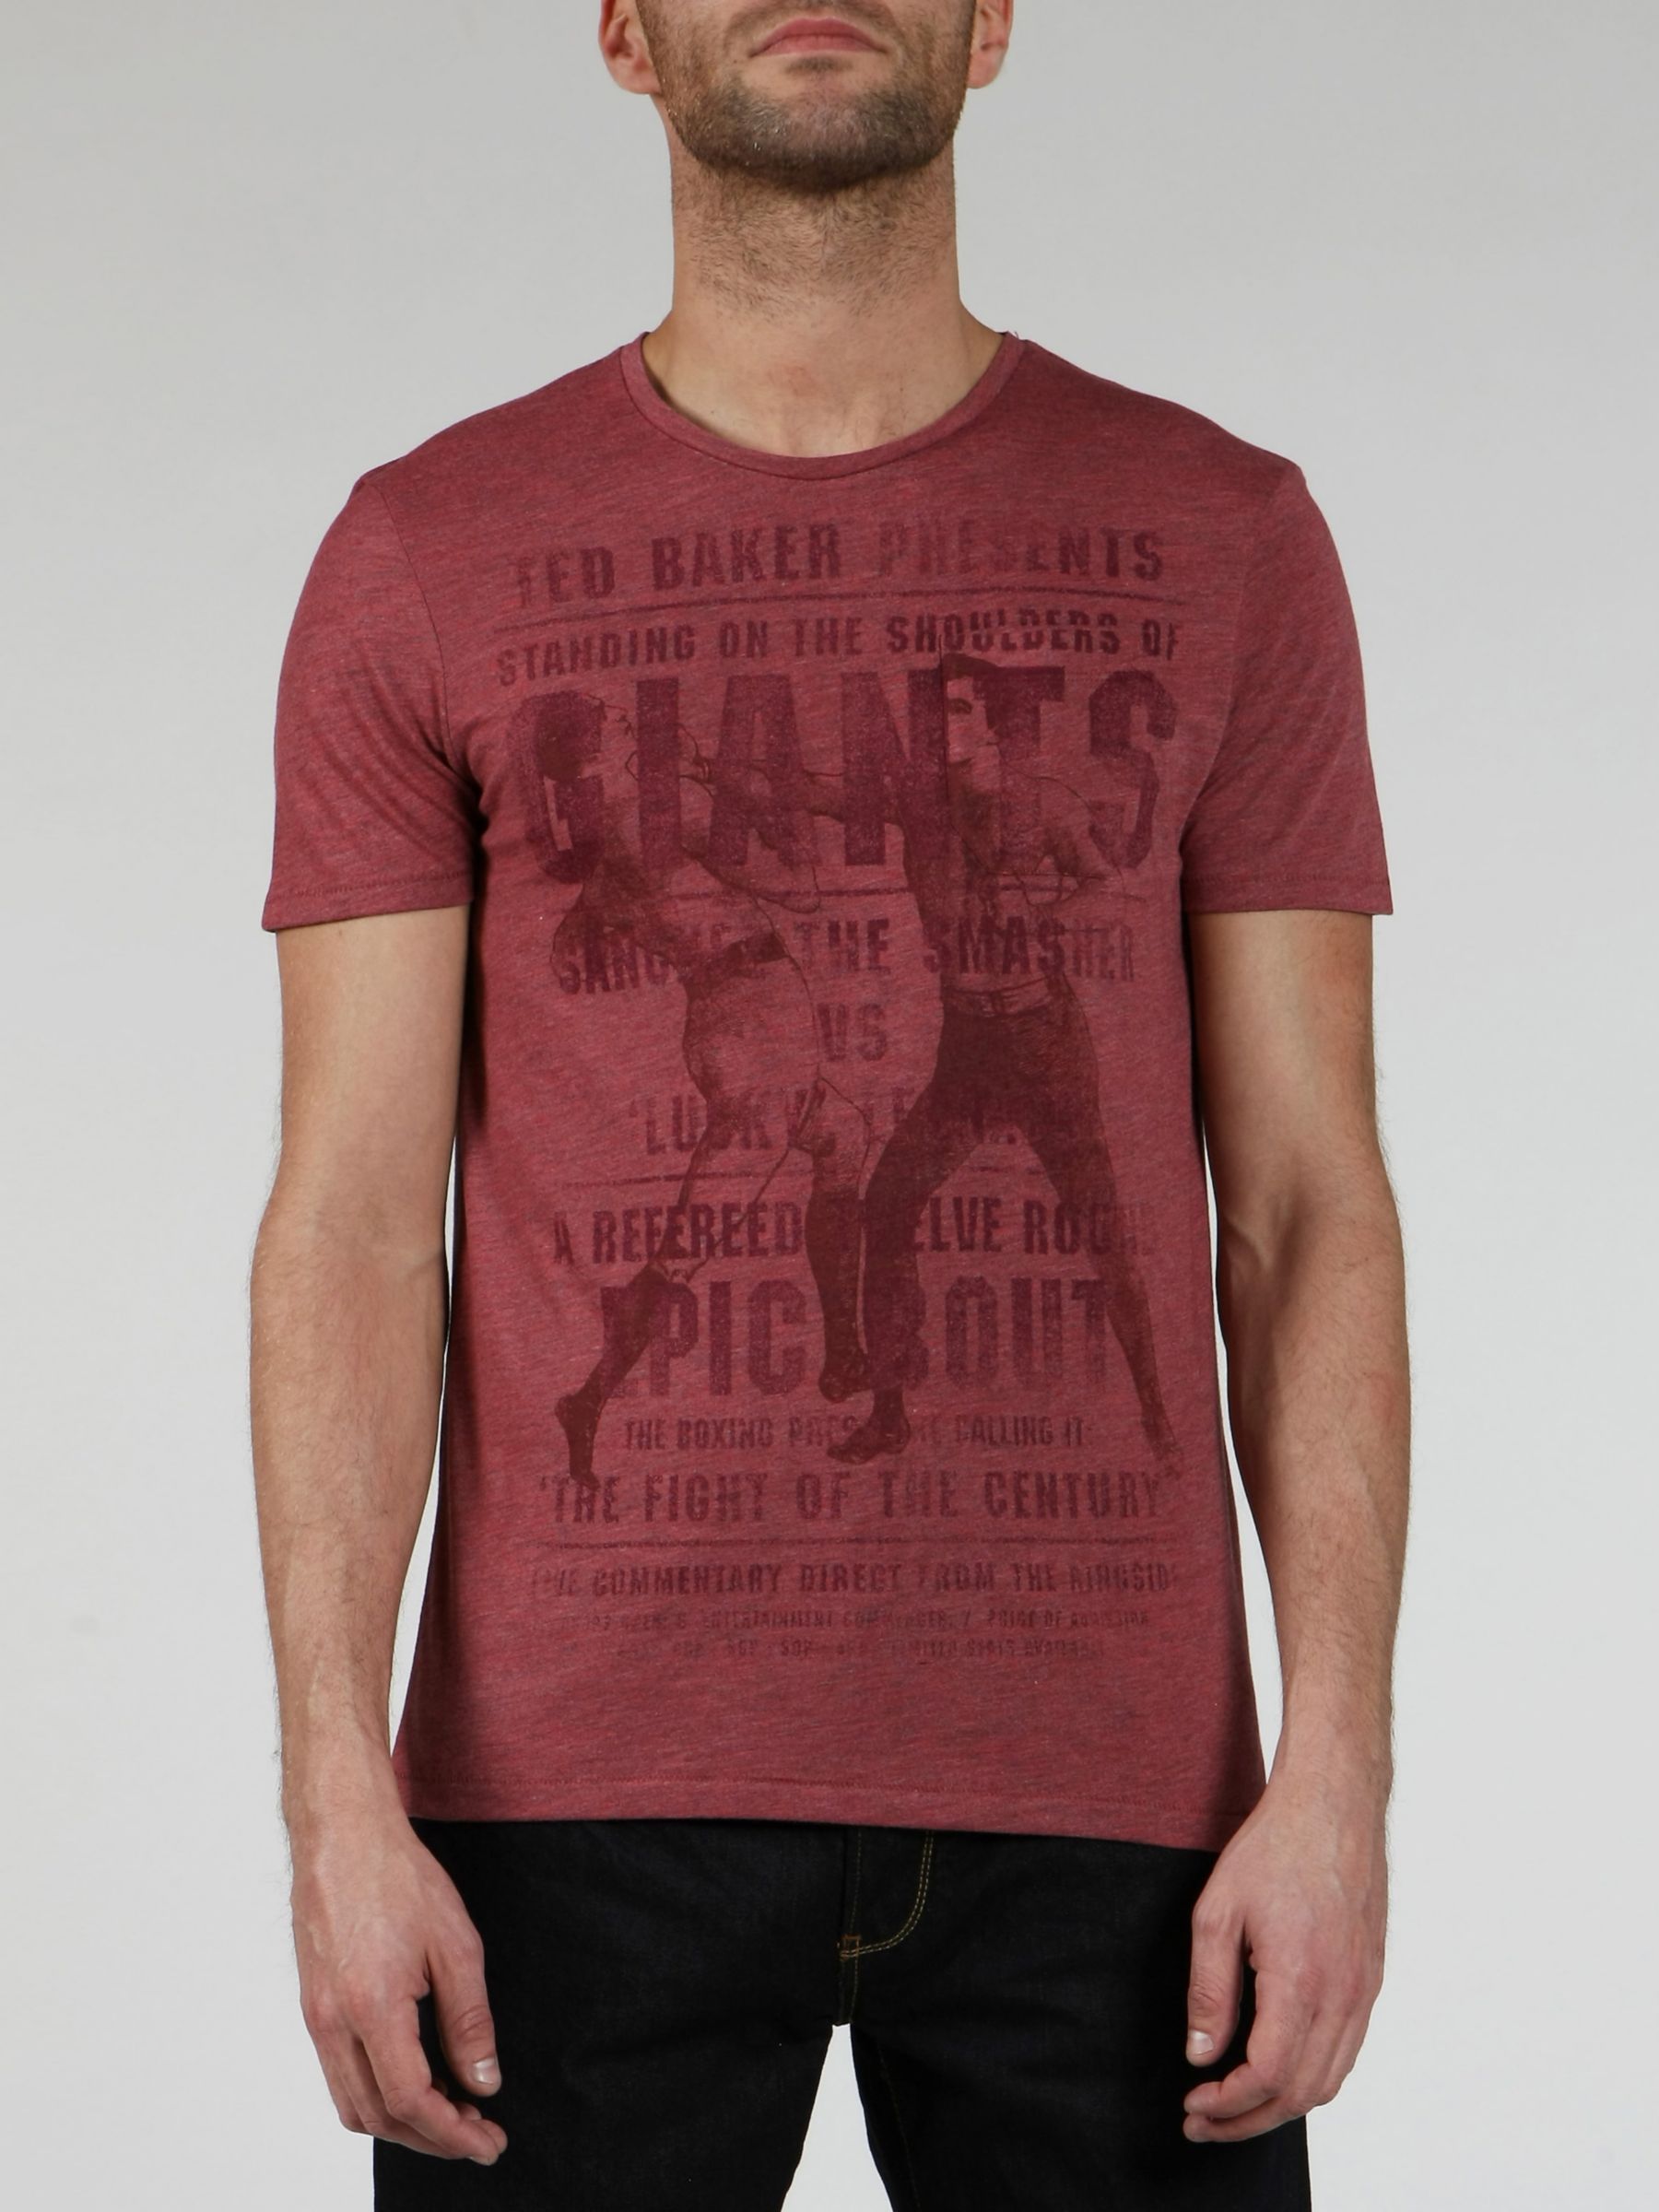 Ted Baker Short-Sleeve Overdyed Graphic T-Shirt,